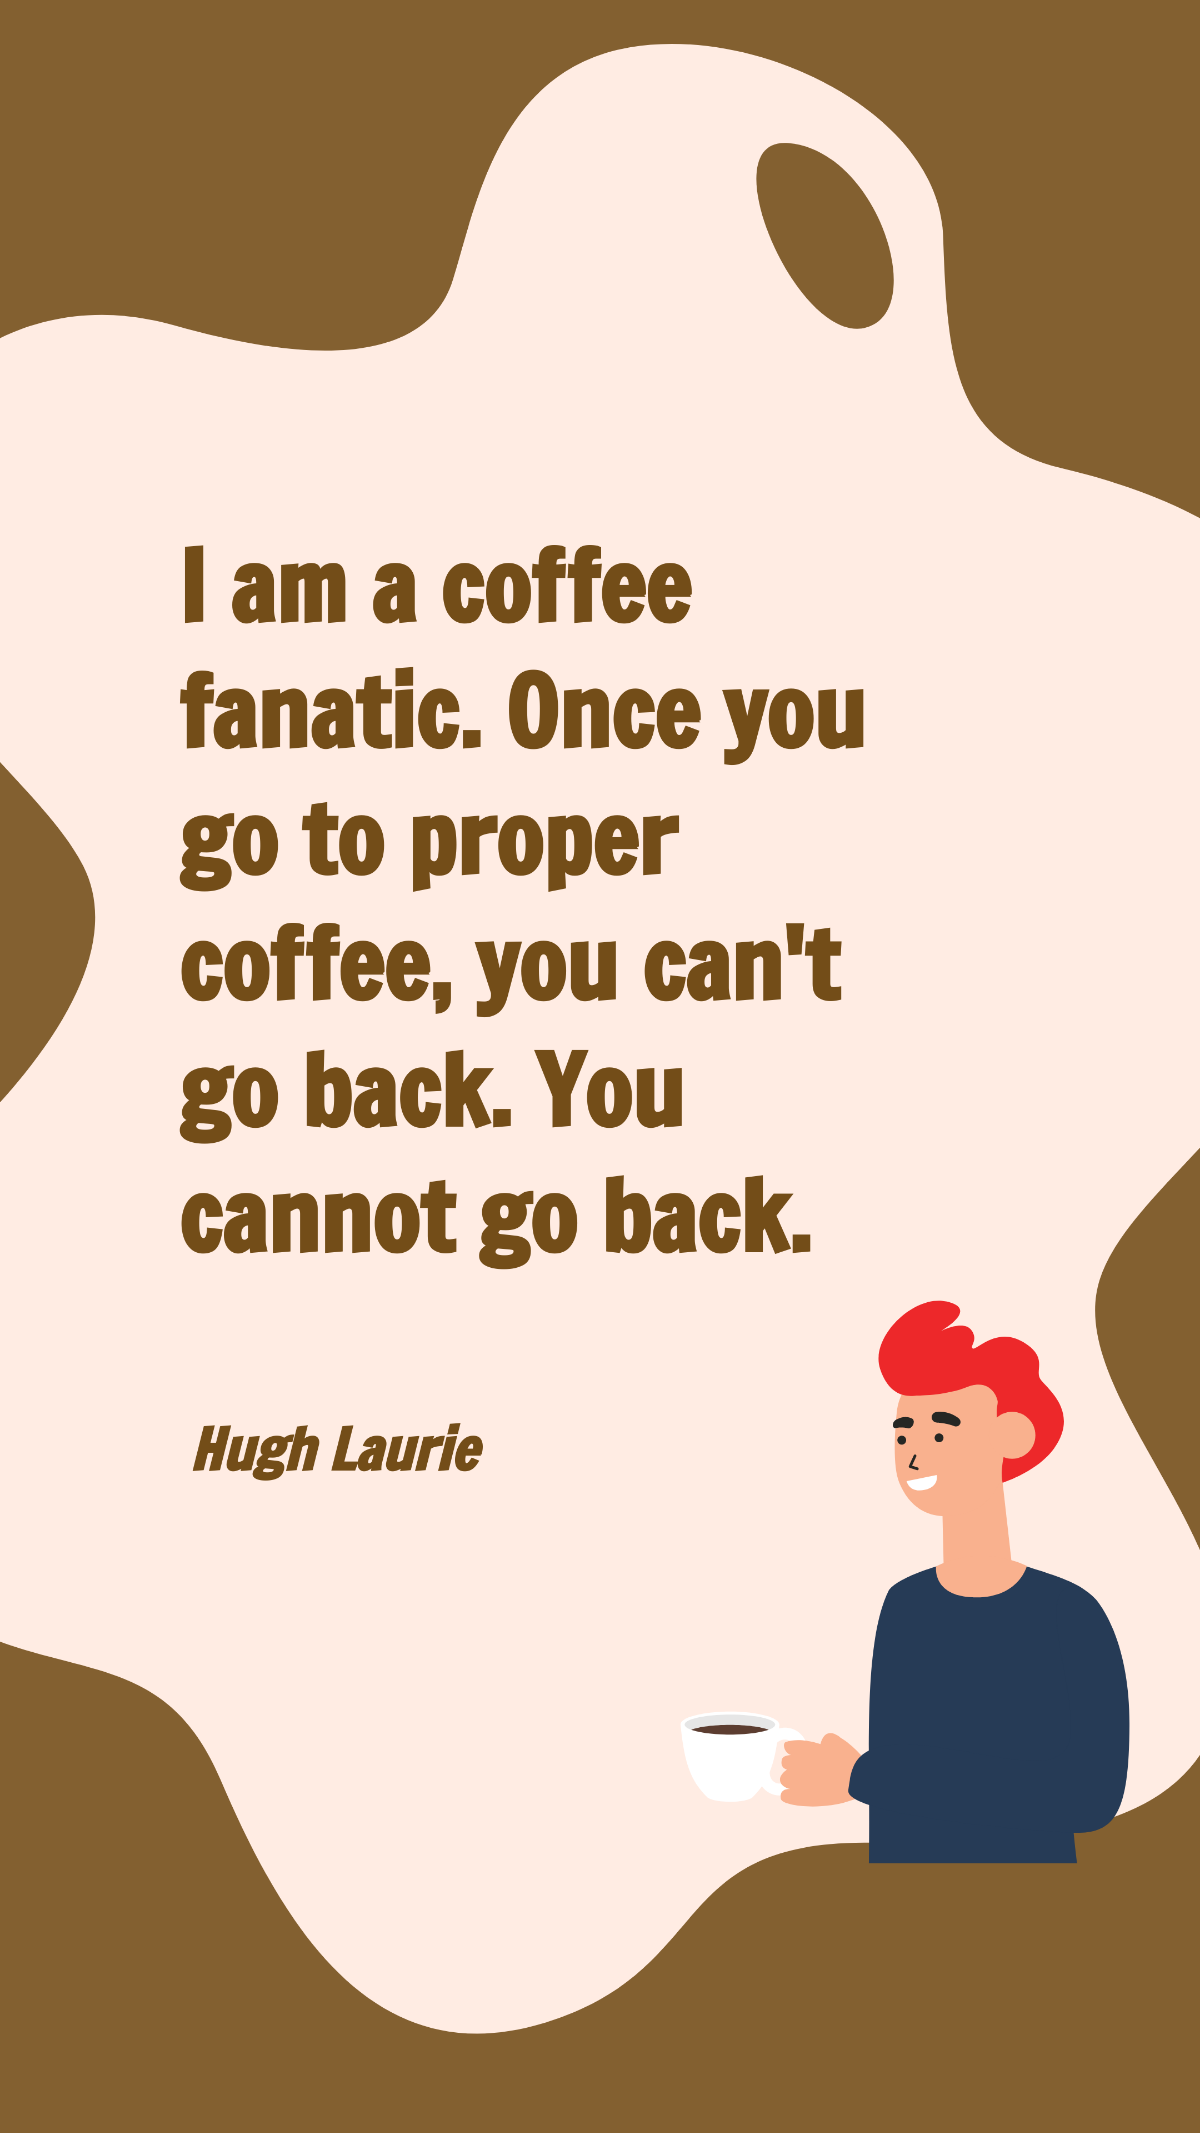 Free Hugh Laurie - I am a coffee fanatic. Once you go to proper coffee, you can't go back. You cannot go back. Template